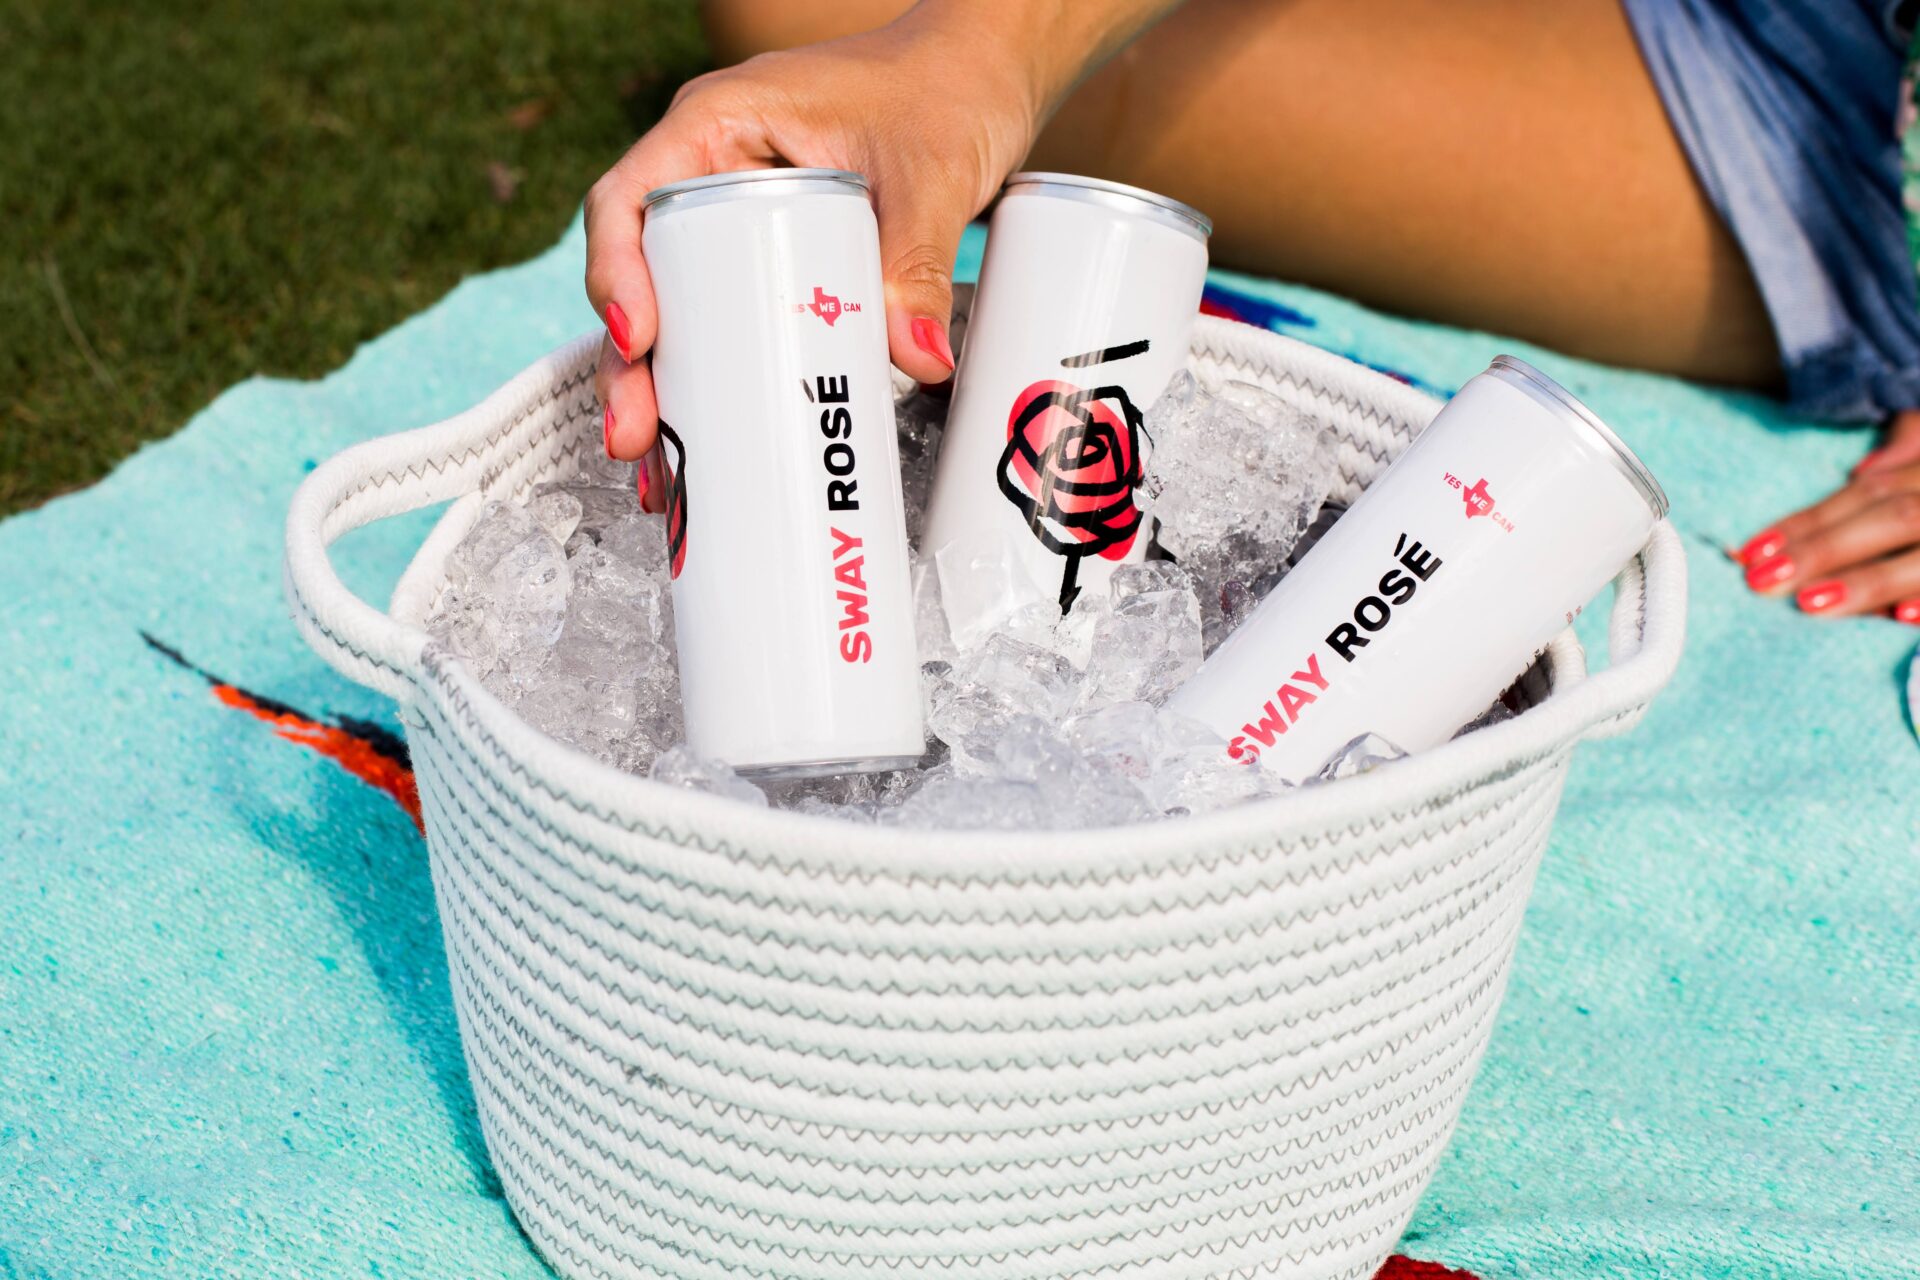 Sway Rose cans in a basket of ice, description and wine pairing offered